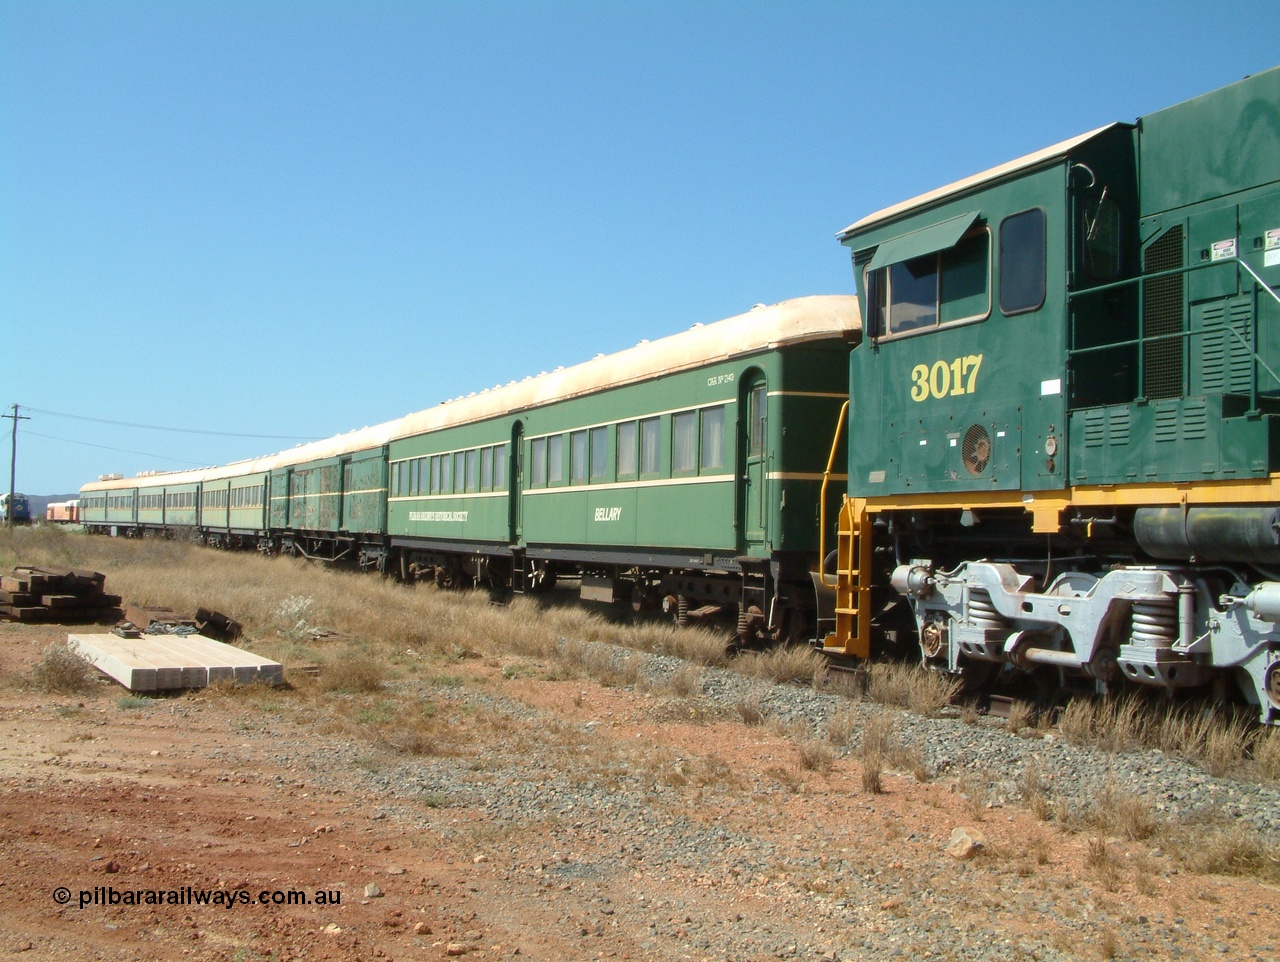 041014 142318
Pilbara Railways Historical Society, view along the passenger carriages behind rebuilt ALCo C636R locomotive 3017 with the first passenger carriage 'Bellany' was originally built by Clyde Engineering at Granville NSW in 1936 for the NSWGR as a second class railway carriage FS type FS 2143. In 1987 it was purchased by the Society and is named after a local river. The next carriage is van 'Portland' and originally an NSWGR MHO type guards van MHO 2321, then recoded to KB type mail van, then to KBY 2513 guards van. 14th October 2004.
Keywords: 3017;Comeng-WA;ALCo;C636R;WA-135-C-6043-04;rebuild;